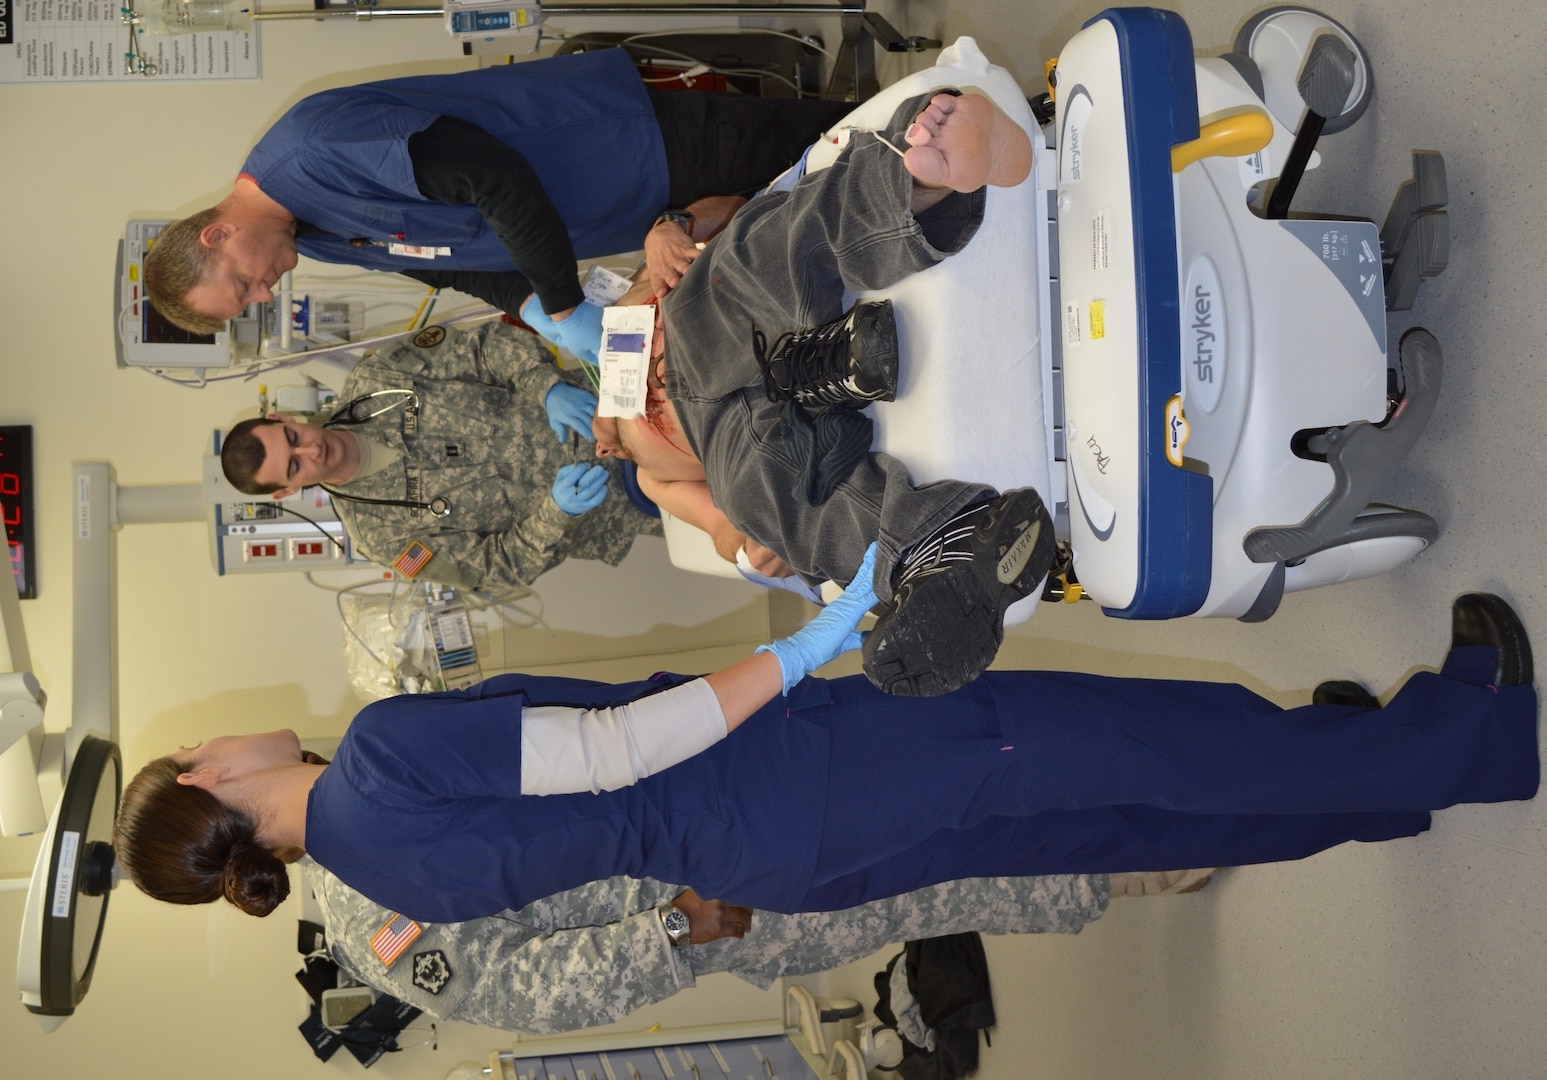 Sgt. Deantrea McInnis (left), mental health technician, and Capt. Lucas Rees (right), chaplain resident, speak to Ashley Giles (center), a nursing student at St. Phillip’s Nursing School, during a mass casualty exercise Nov. 9 at Brooke Army Medical Center. Giles tested their ability to not only deal with her physical injuries but also her emotions after a traumatic event such as an active shooter.